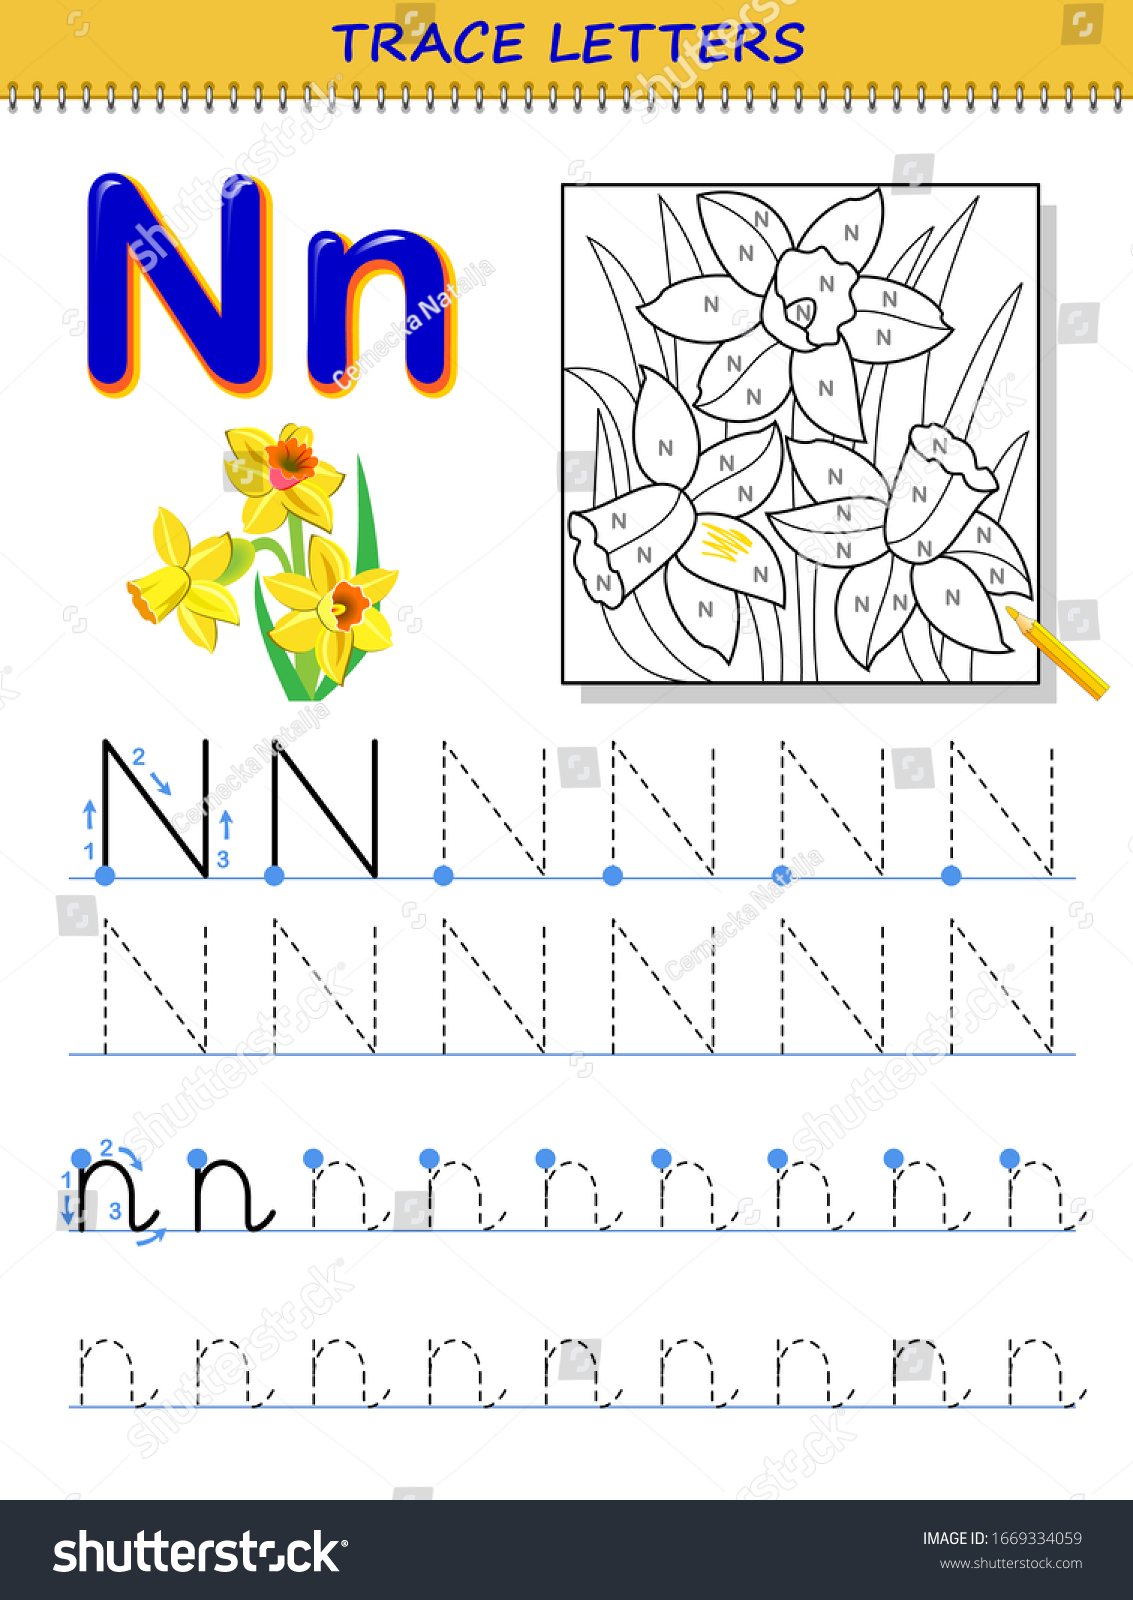 Tracing letter n study alphabet printable stock vector royalty free